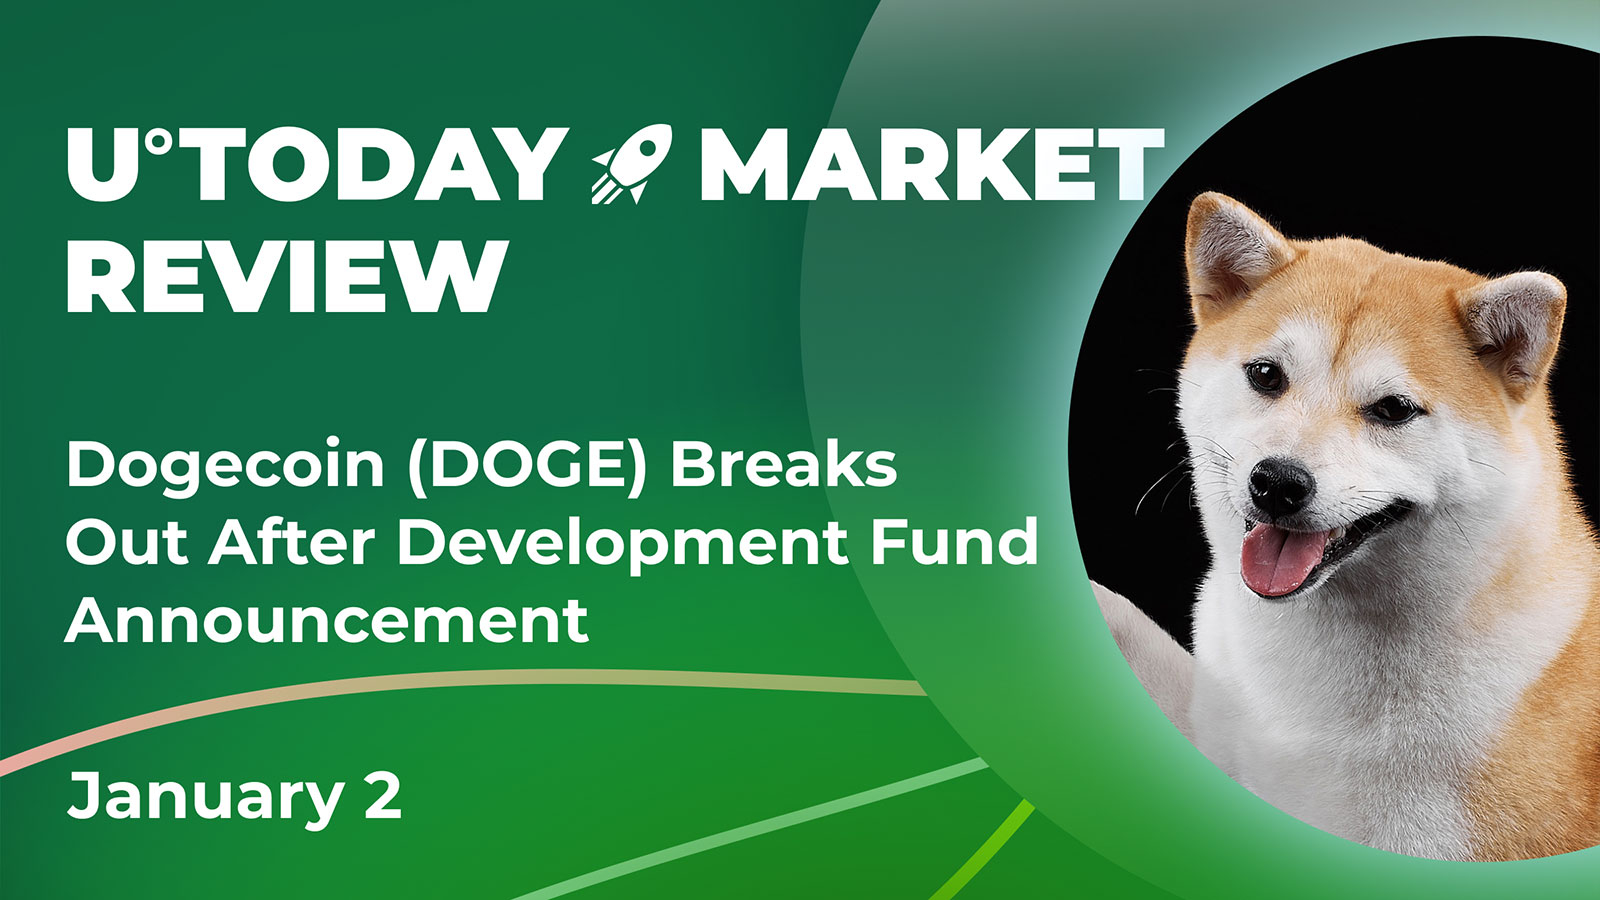 Dogecoin (DOGE) Breaks Out After Development Fund Announcement: Crypto Market Review, Jan. 2